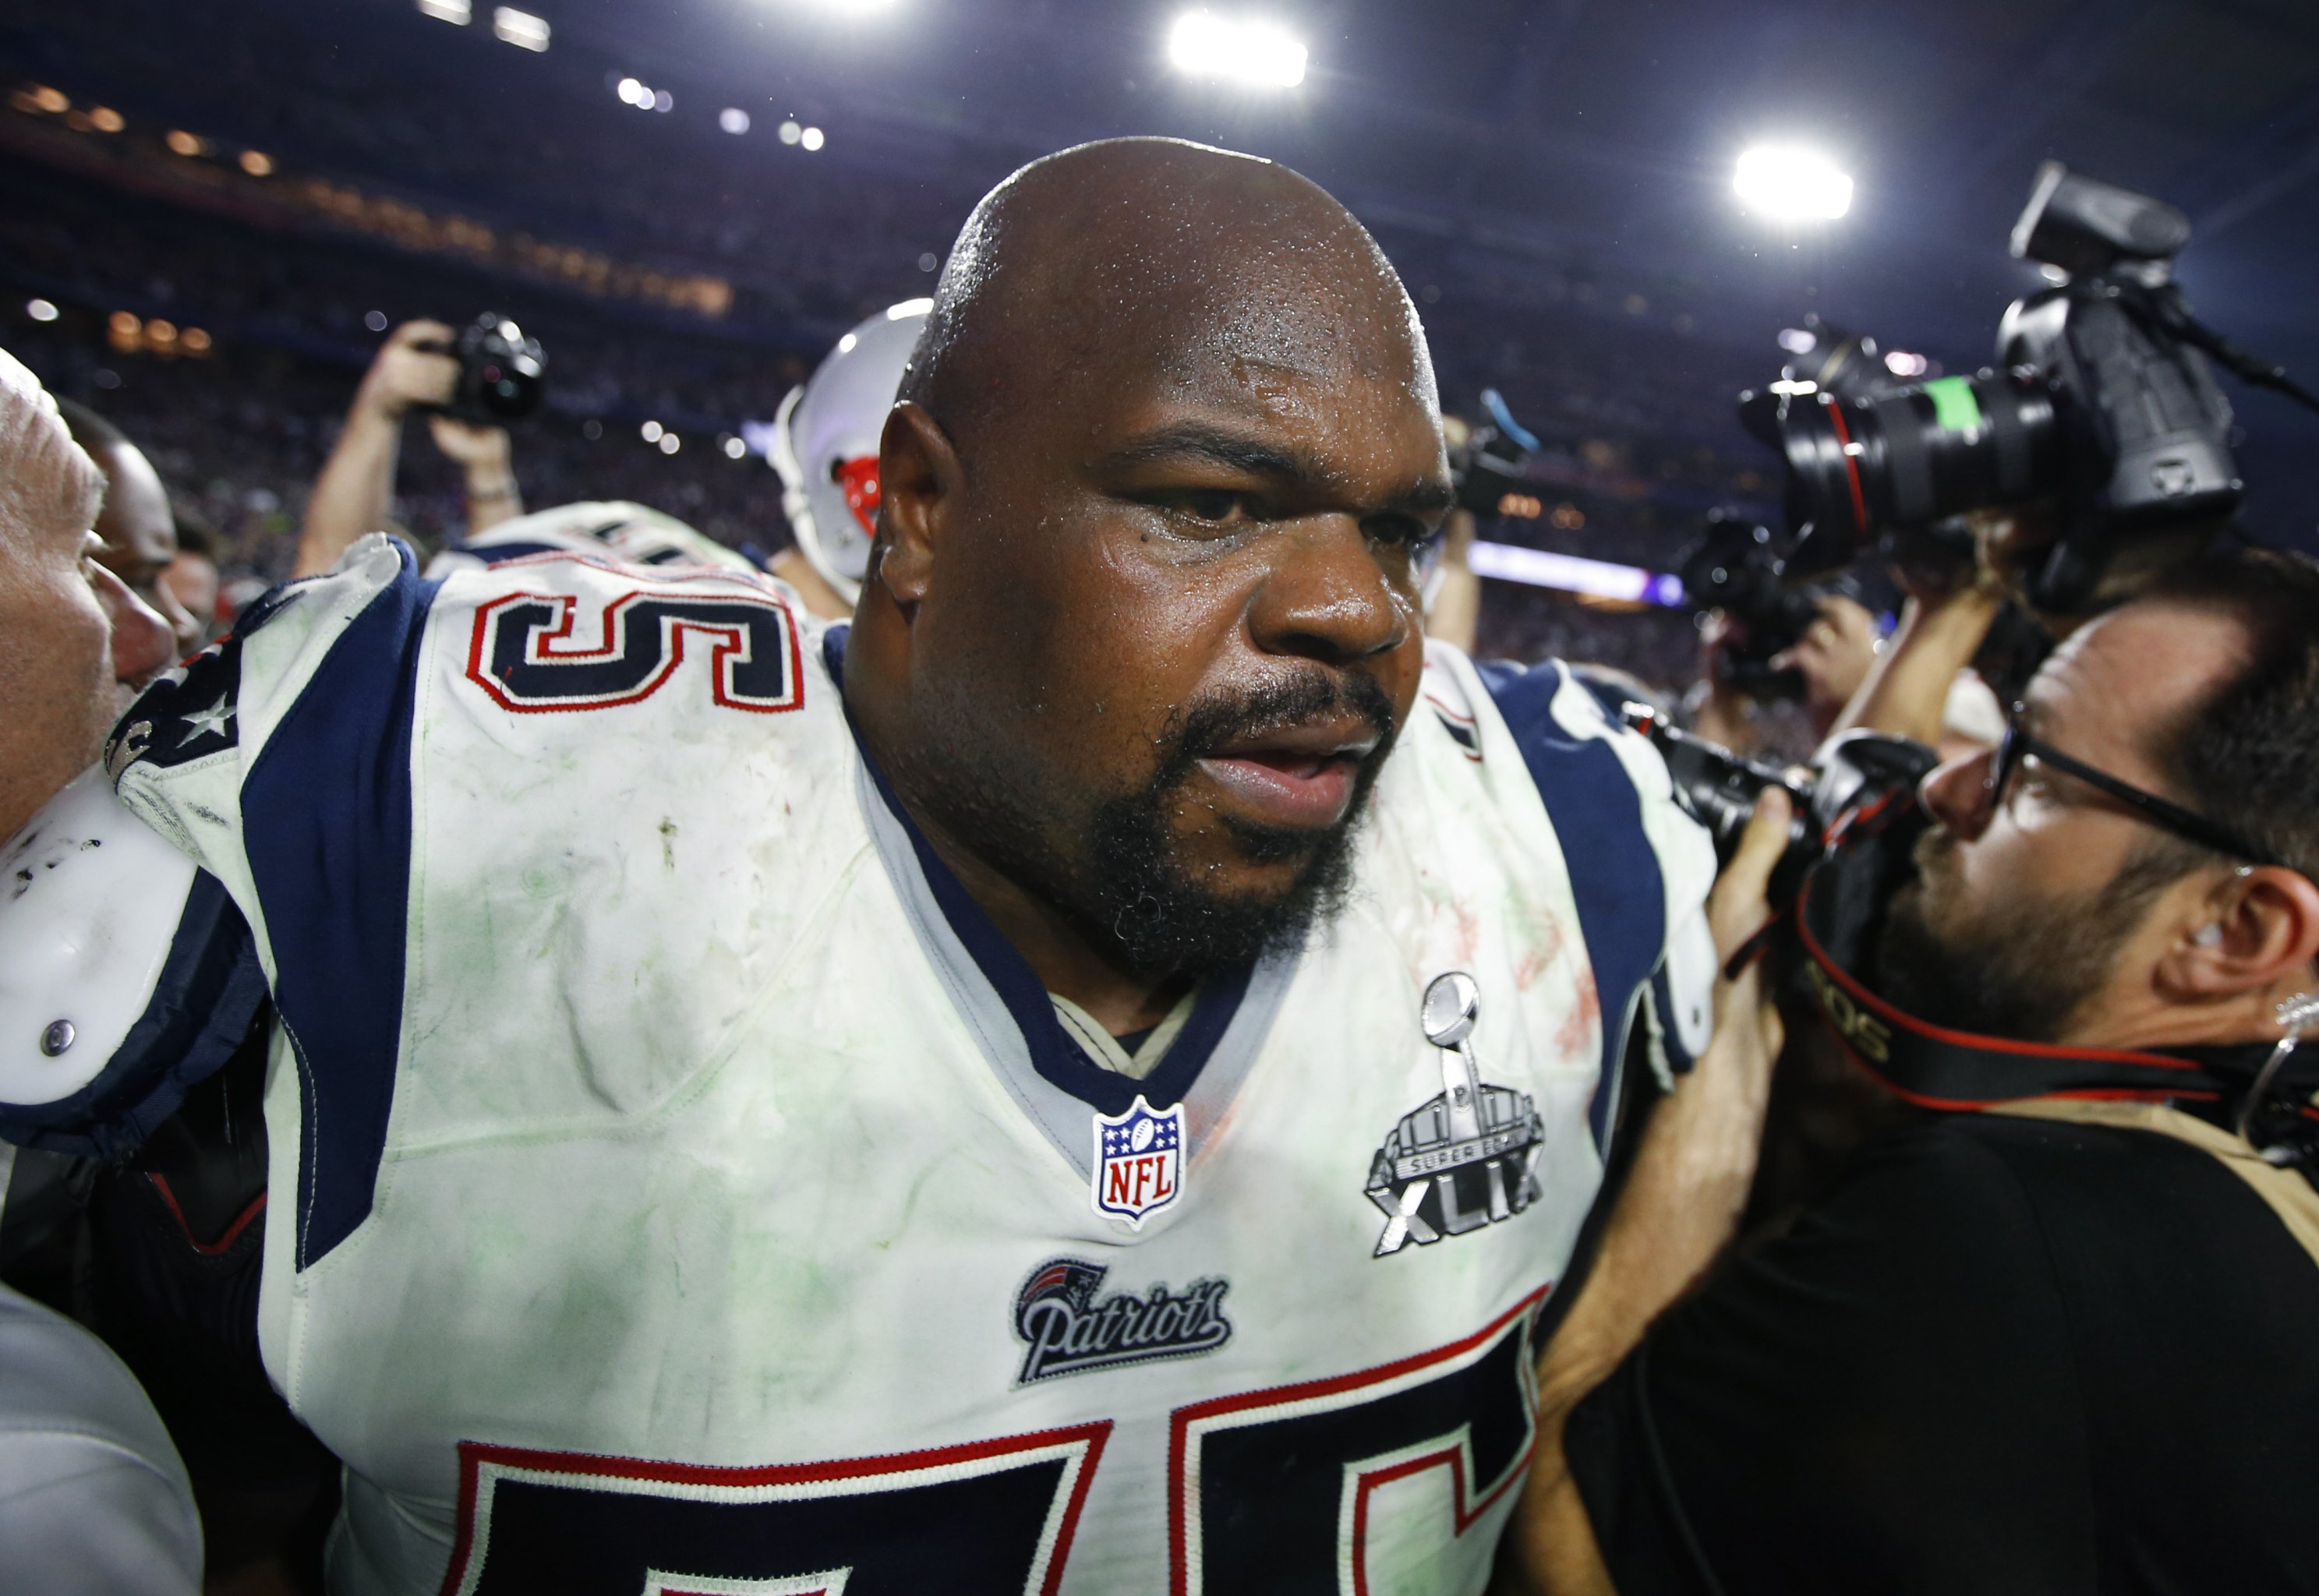 Vince Wilfork says Patriots won't pick up his option